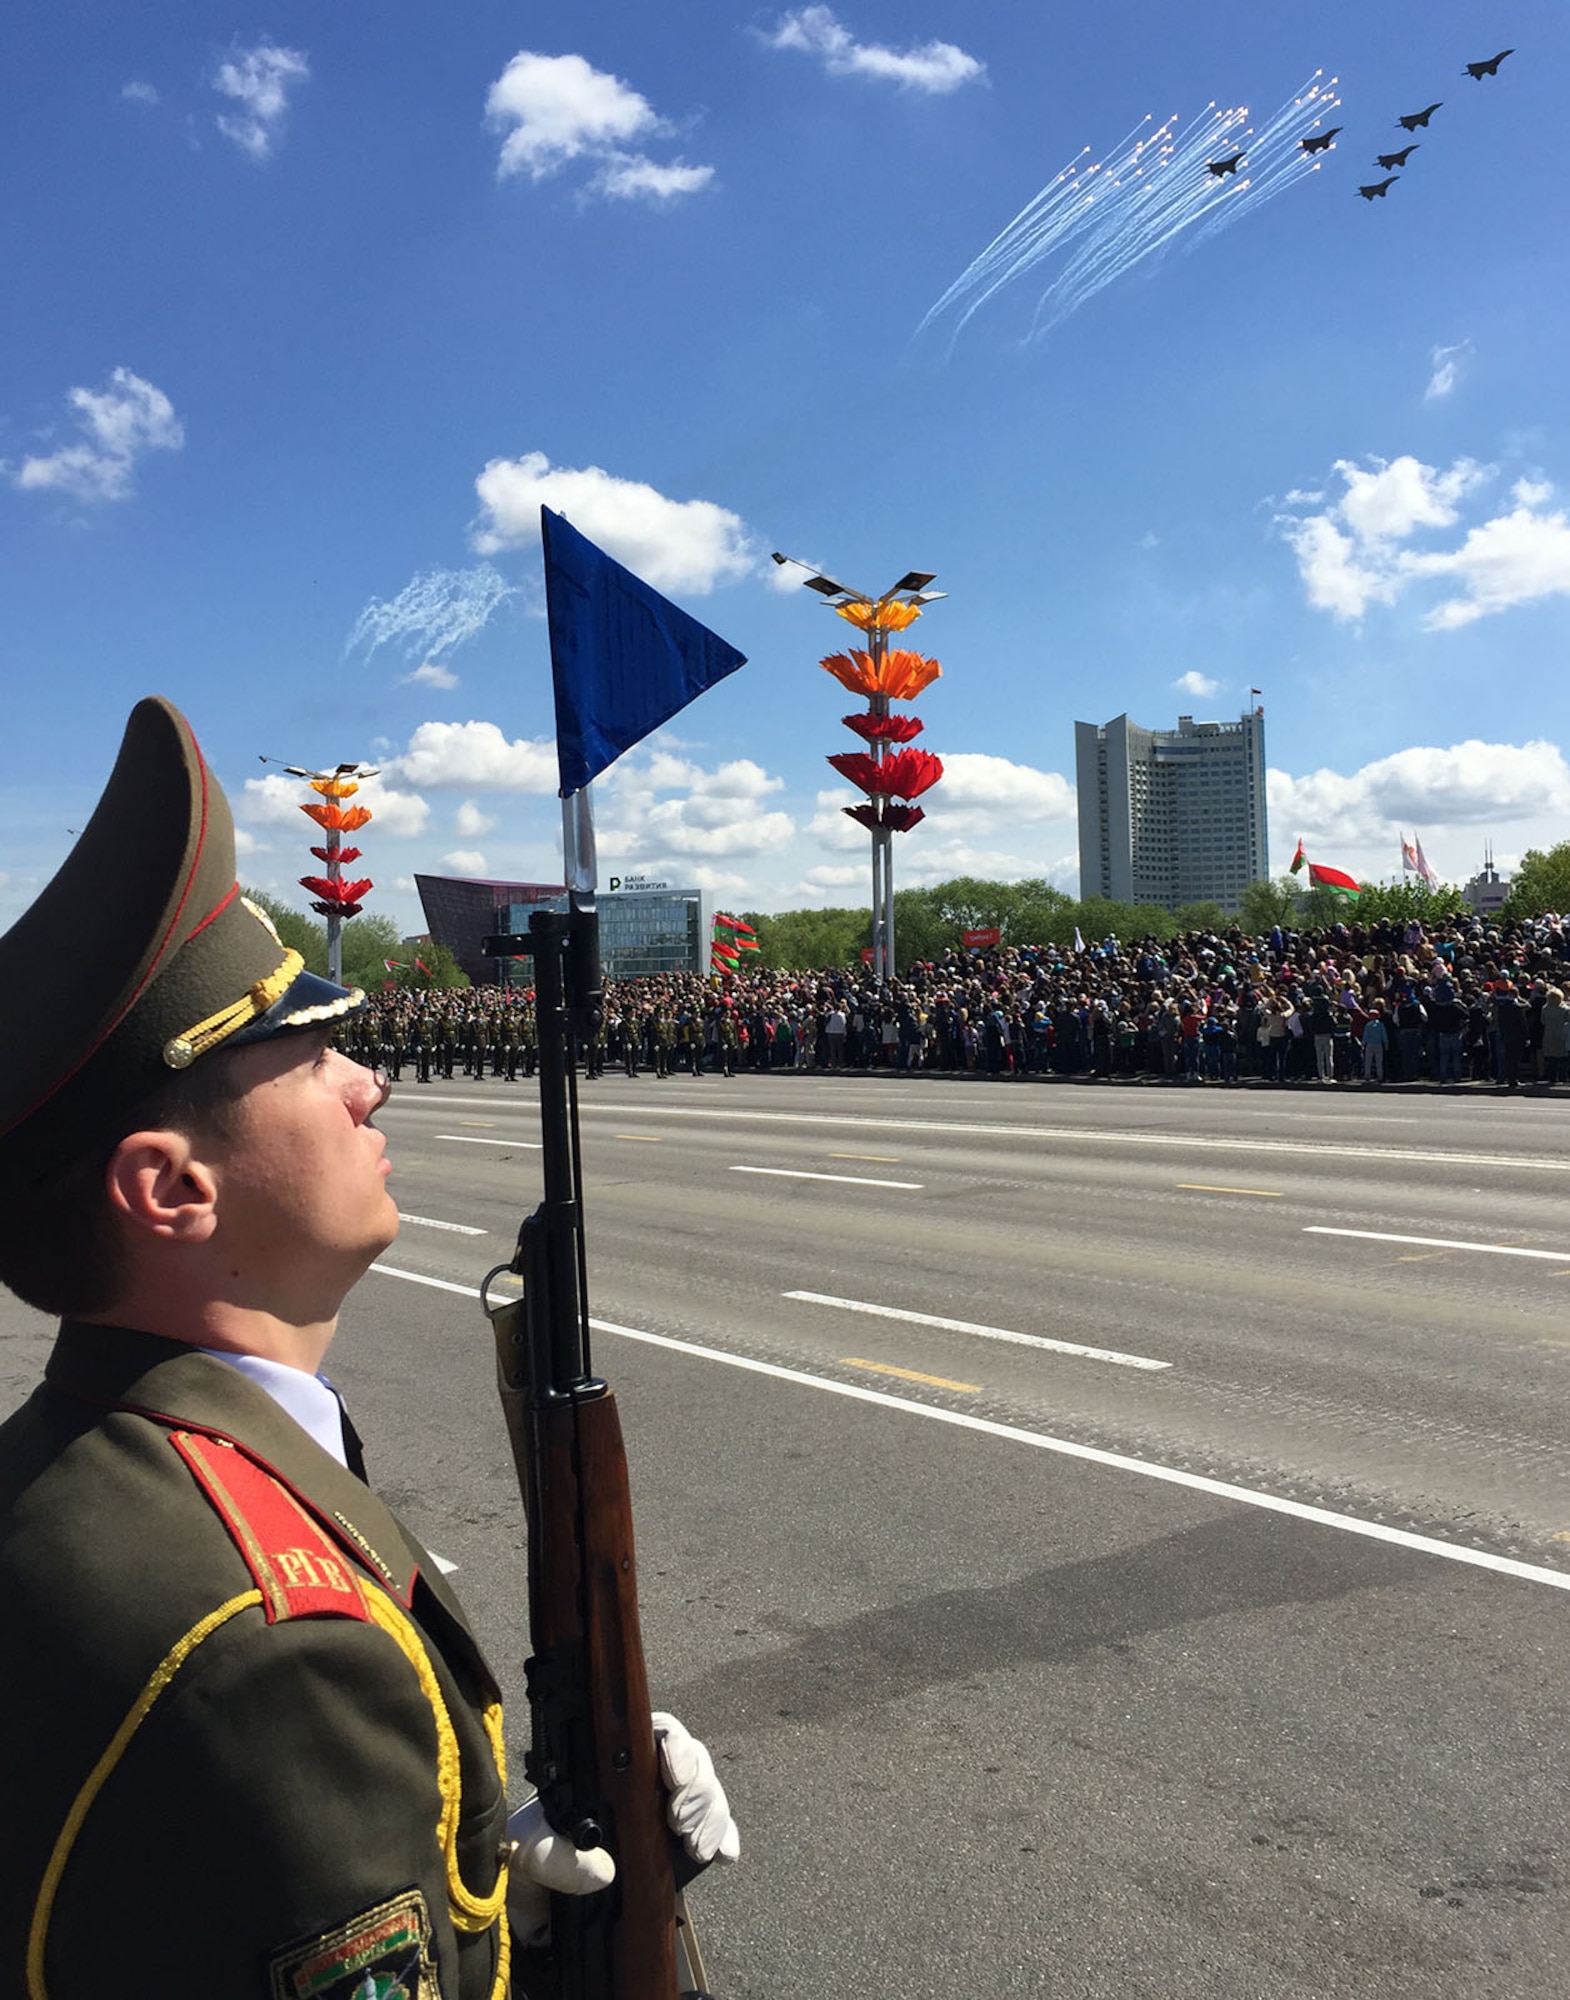 MINSK, BELARUS -- An Armed Forces of Belarus soldier stands at attention as 
Belarussian air force aircraft provide an air power demonstration during the 
World War II Victory Day Parade May 9, 2015, in Minsk, Belarus. For the first 
time in Belarus' history, participants from the U.S. Department of Defense 
marched in the parade to commemorate the sacrifices of the World War II Allies 
and the end of hostilities 70 years ago. Thirty-four Airmen from the U.S. Air 
Forces in Europe Band joined more than 5,000 Belarussian soldiers and 250 
military vehicles in the Victory Day Parade. (U.S. Air Force photo by Master 
Sgt. Brian Bahret)
